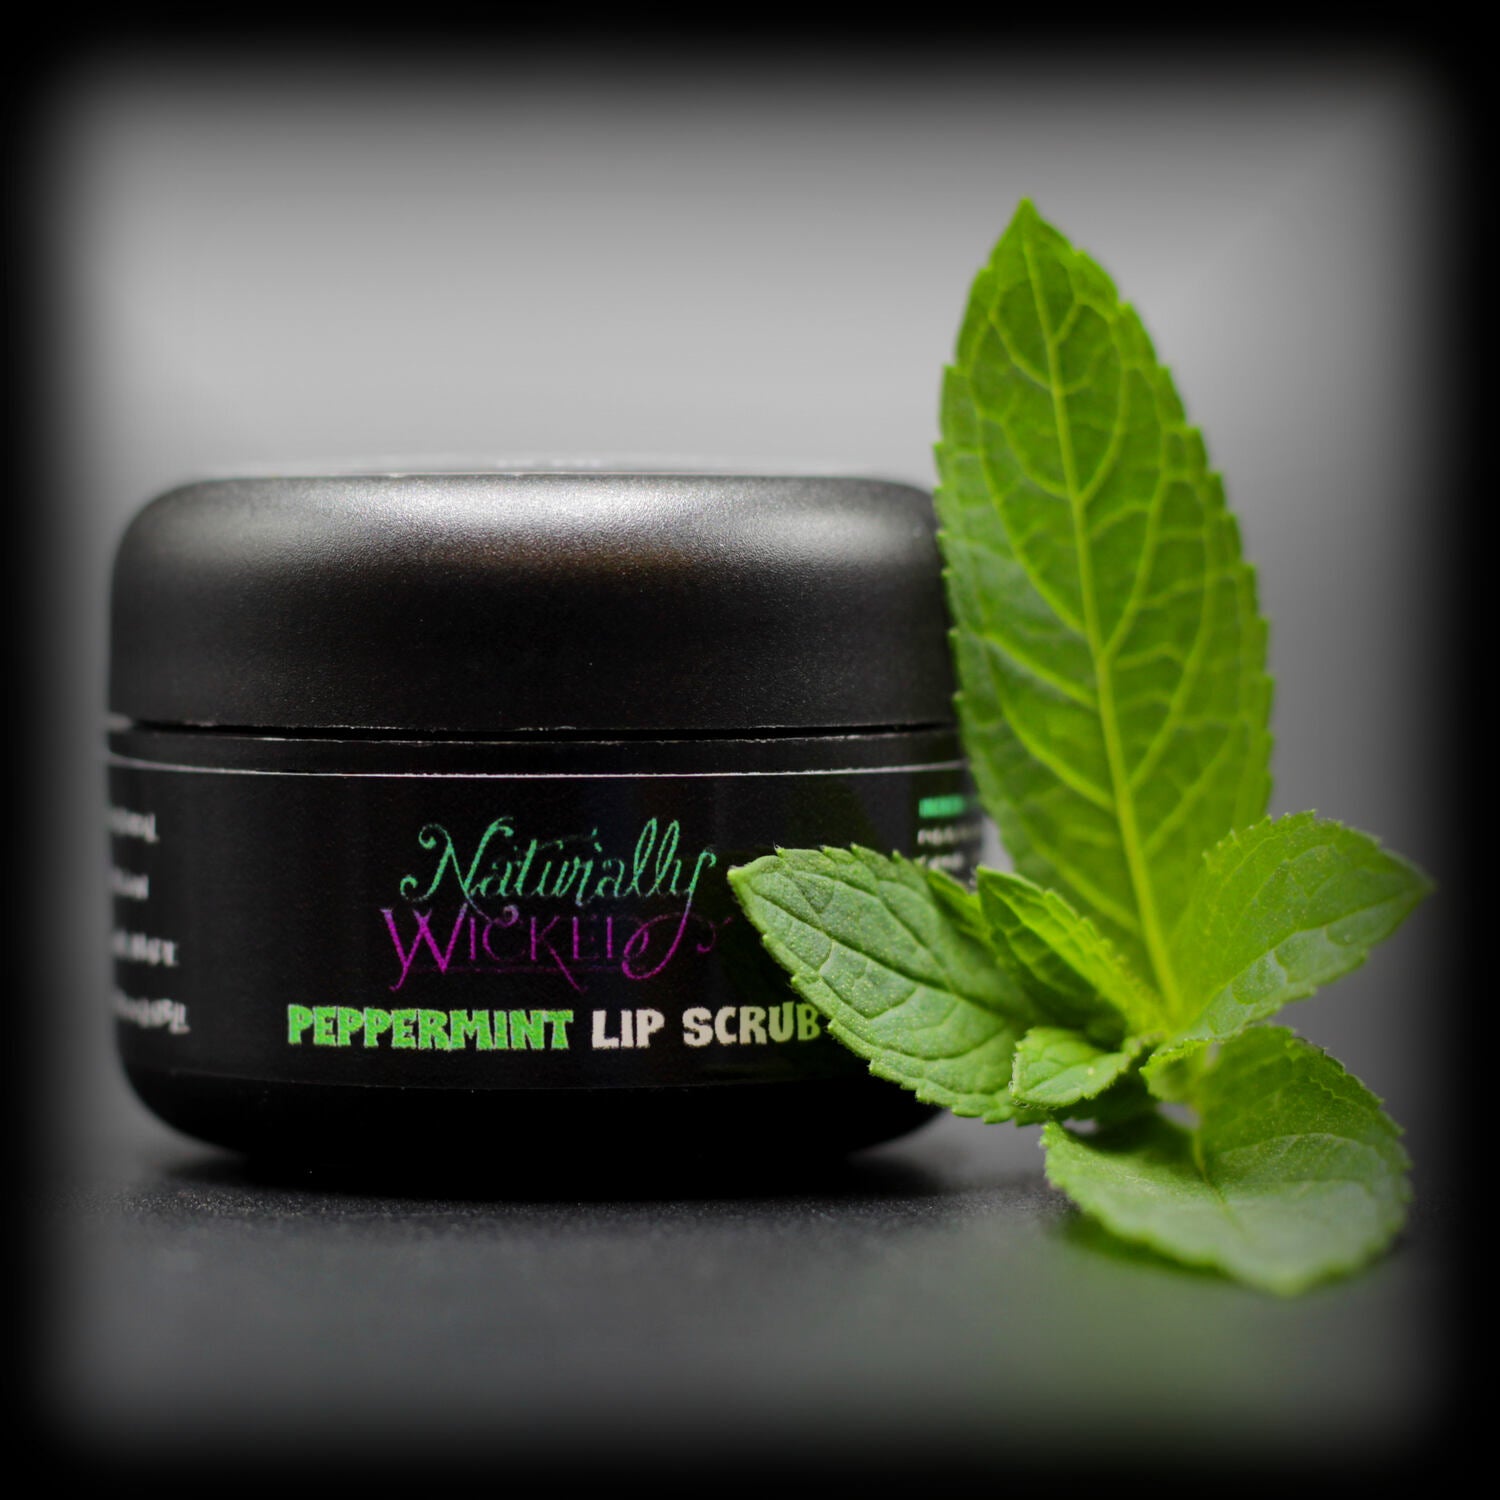 Naturally Wicked Peppermint Lip Scrub In Luxury Black Container Beside Fresh Green Peppermint Leaf